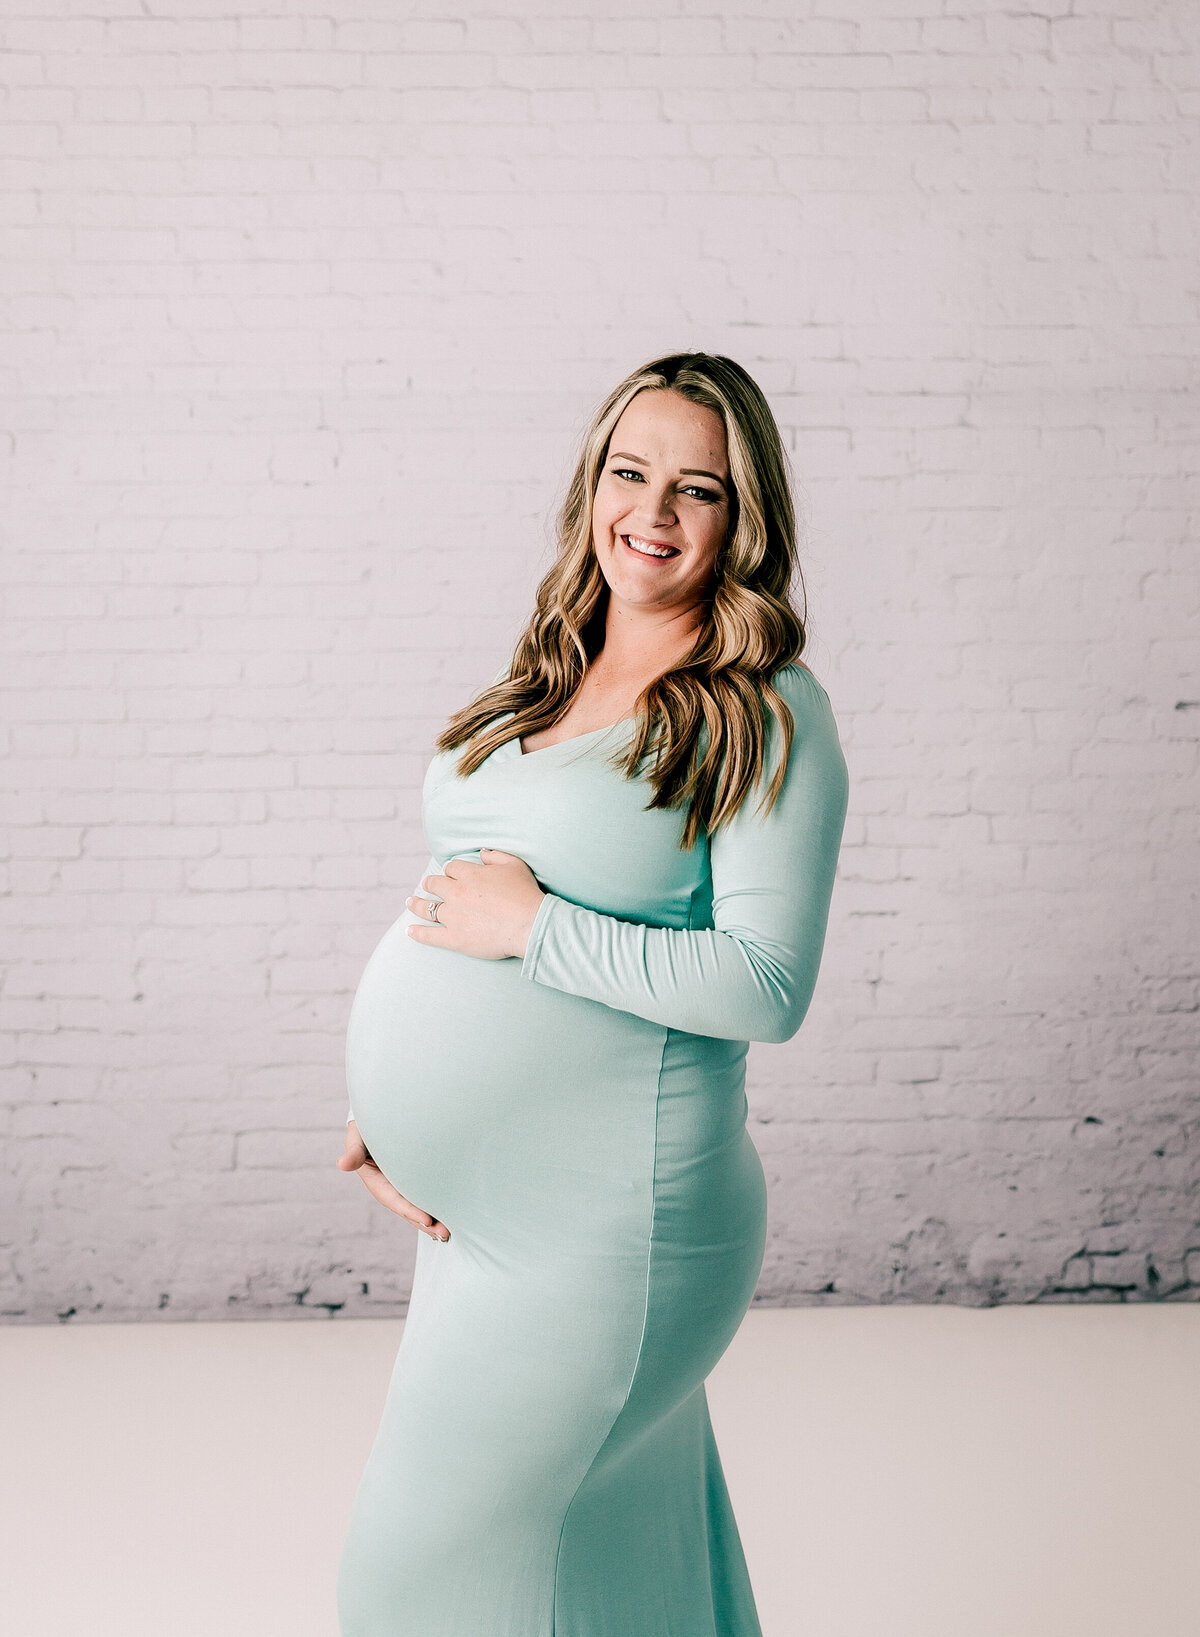 Mint green maternity gown in a photo by Diane Owen.